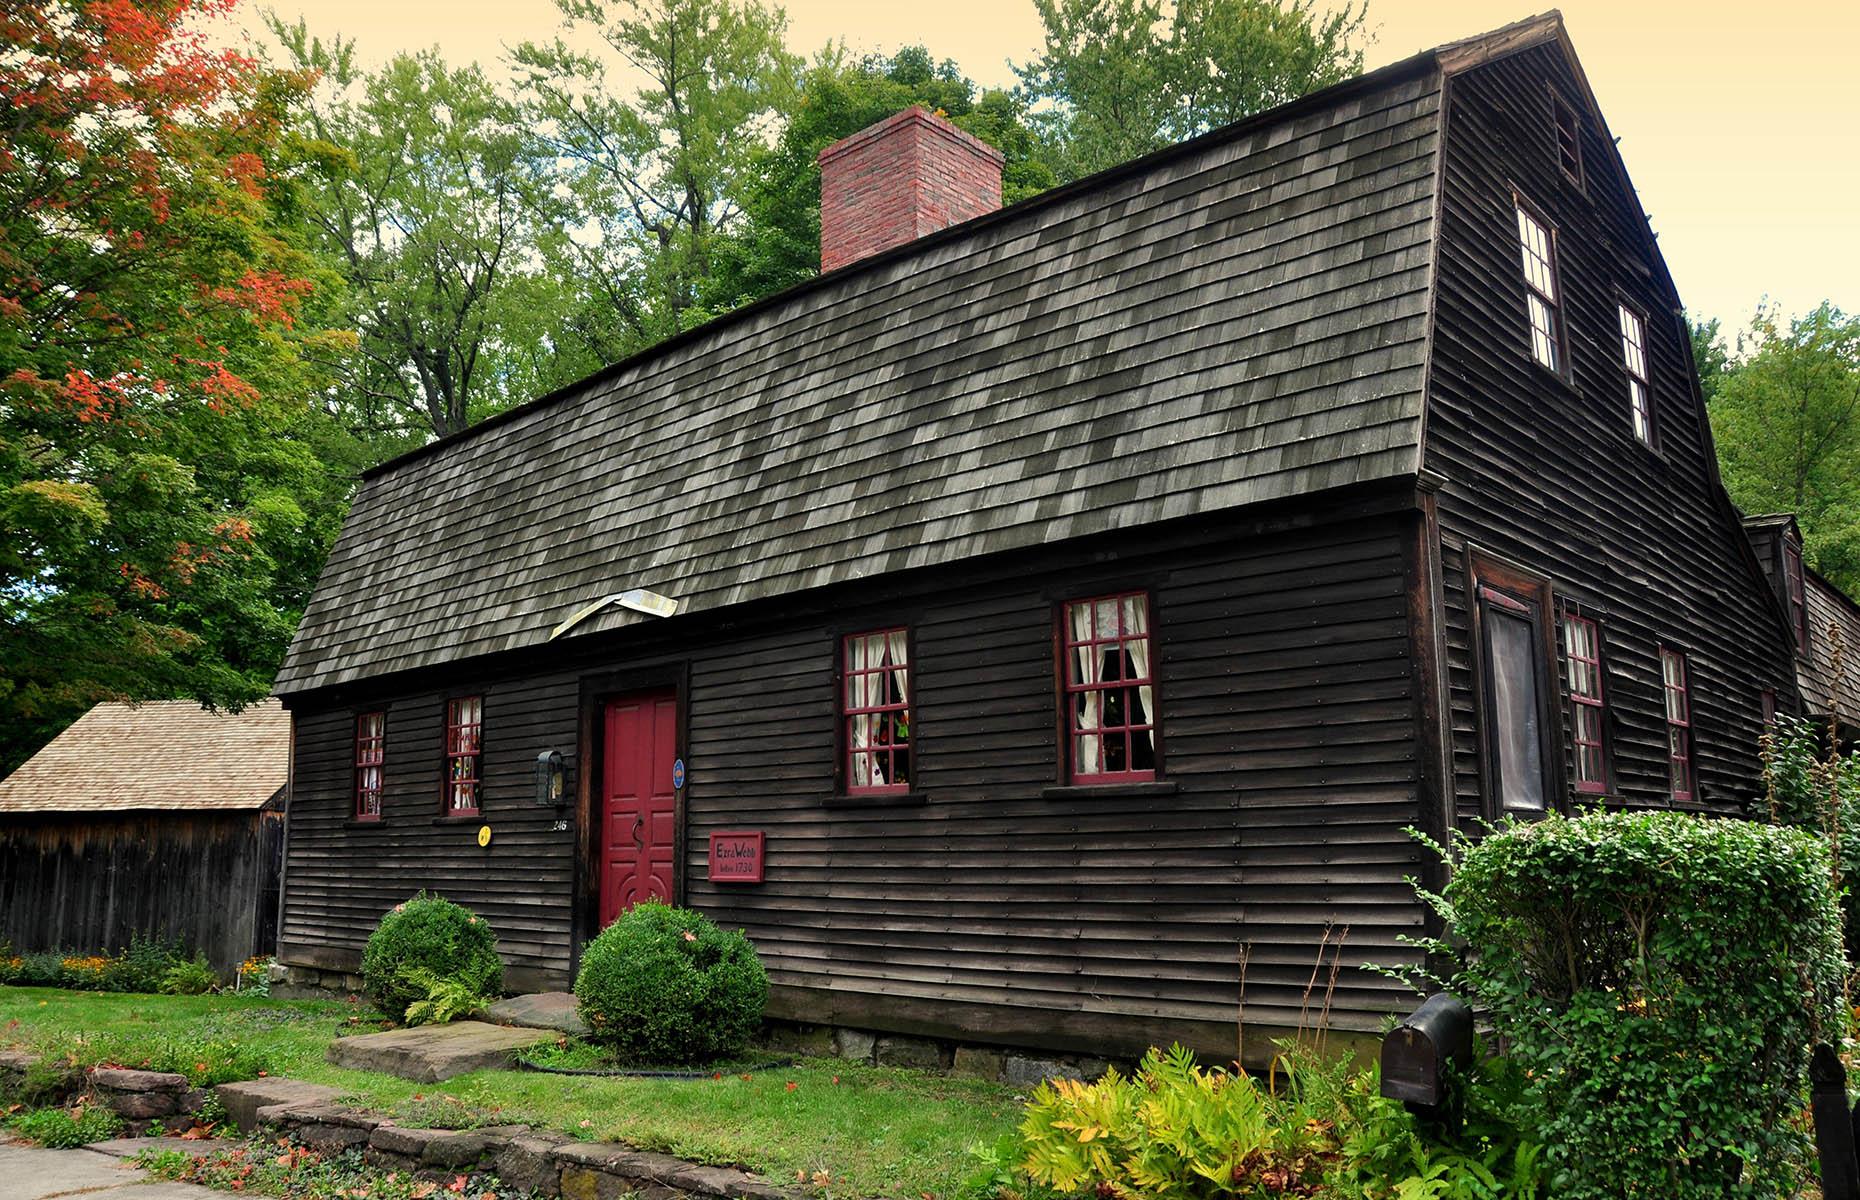 <p>During the late 1700s and early 1800s Wethersfield in Hartford County was the center of the onion trade in New England, earning the town the unflattering moniker ‘Oniontown’. Founded in 1634, it's also known as 'Ye Most Ancient Towne' in Connecticut, a status reflected in the colonial homes, 150 of which pre-date the Civil War. It is this rich heritage that draws visitors, but it would be remiss of you not to at least try a famous Wethersfield red onion on your visit.</p>  <p><a href="https://www.loveexploring.com/gallerylist/65036/20-of-americas-most-historic-towns-and-cities"><strong>These are America's most historic towns and cities</strong></a></p>